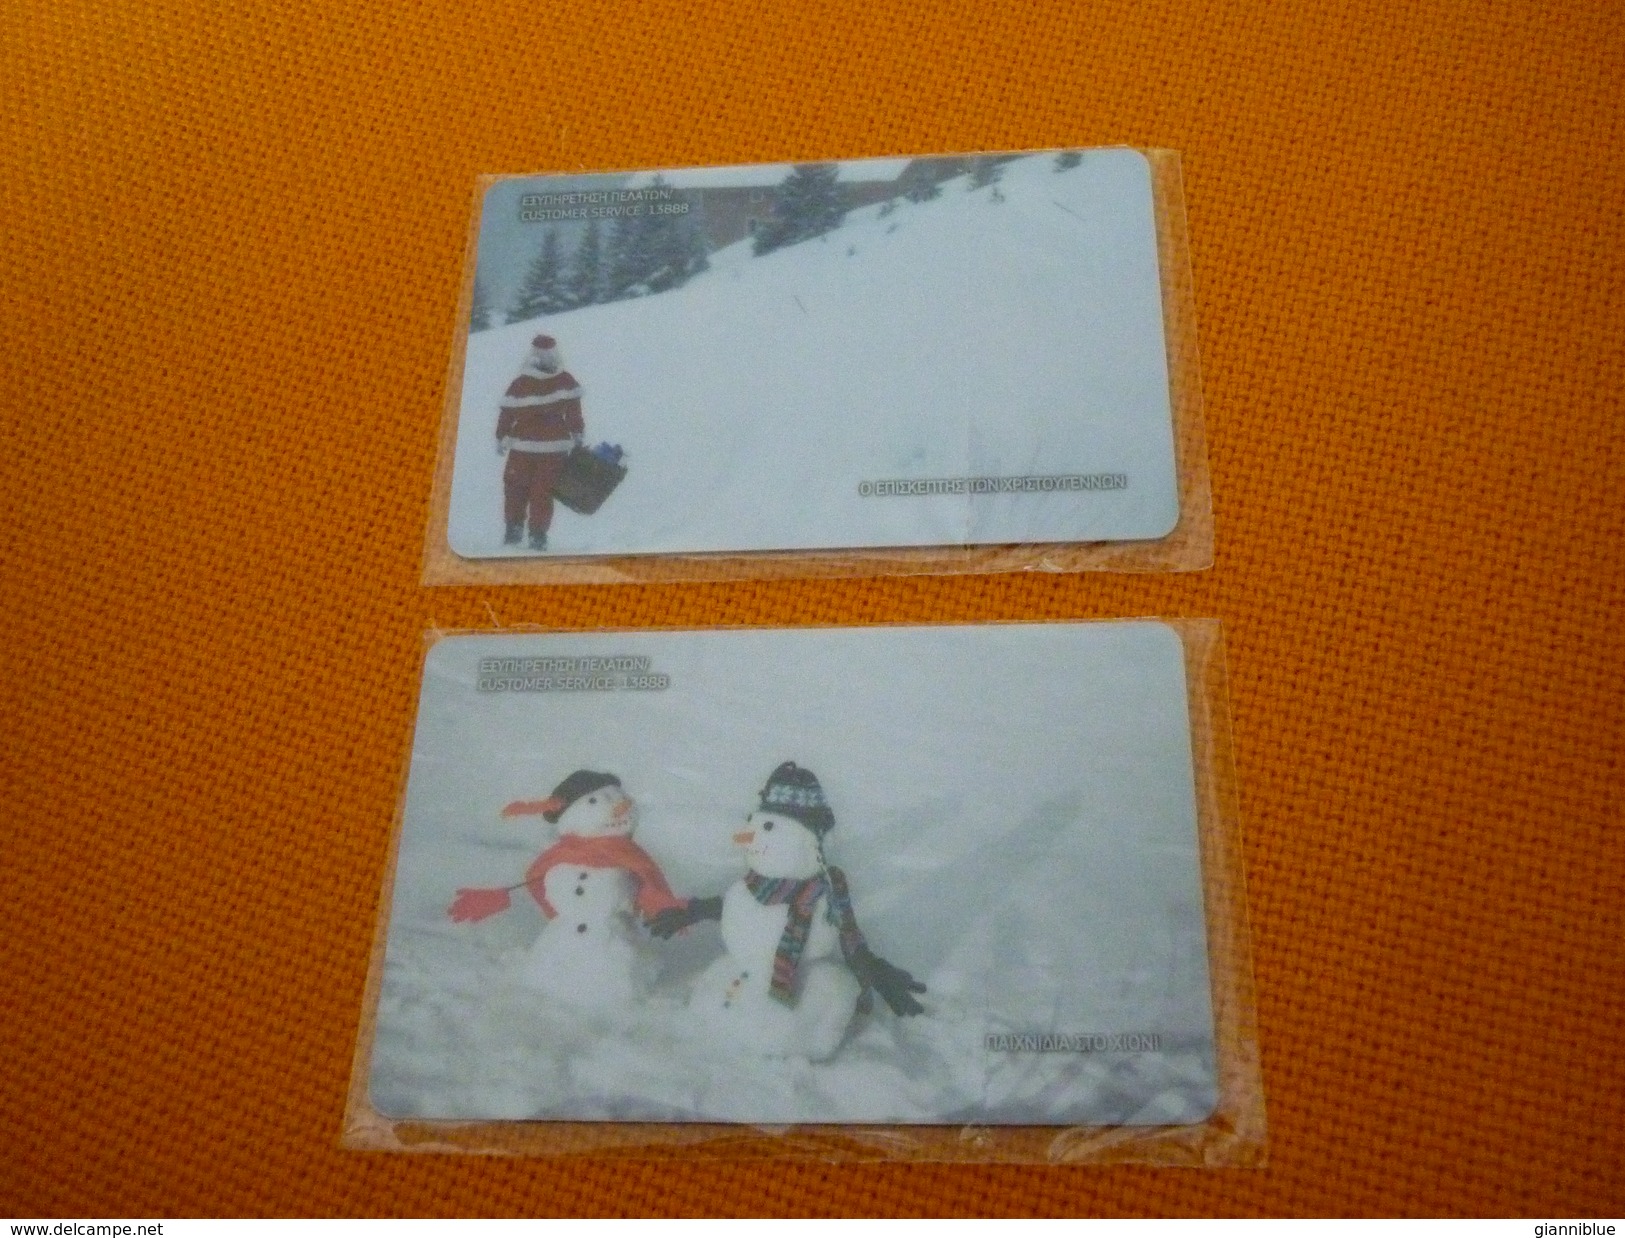 Christmas Noel Santa Claus Snowman Phonecard Set Of 2 Greek Collector's Cards Only 2000 Pieces (mint) - Noel